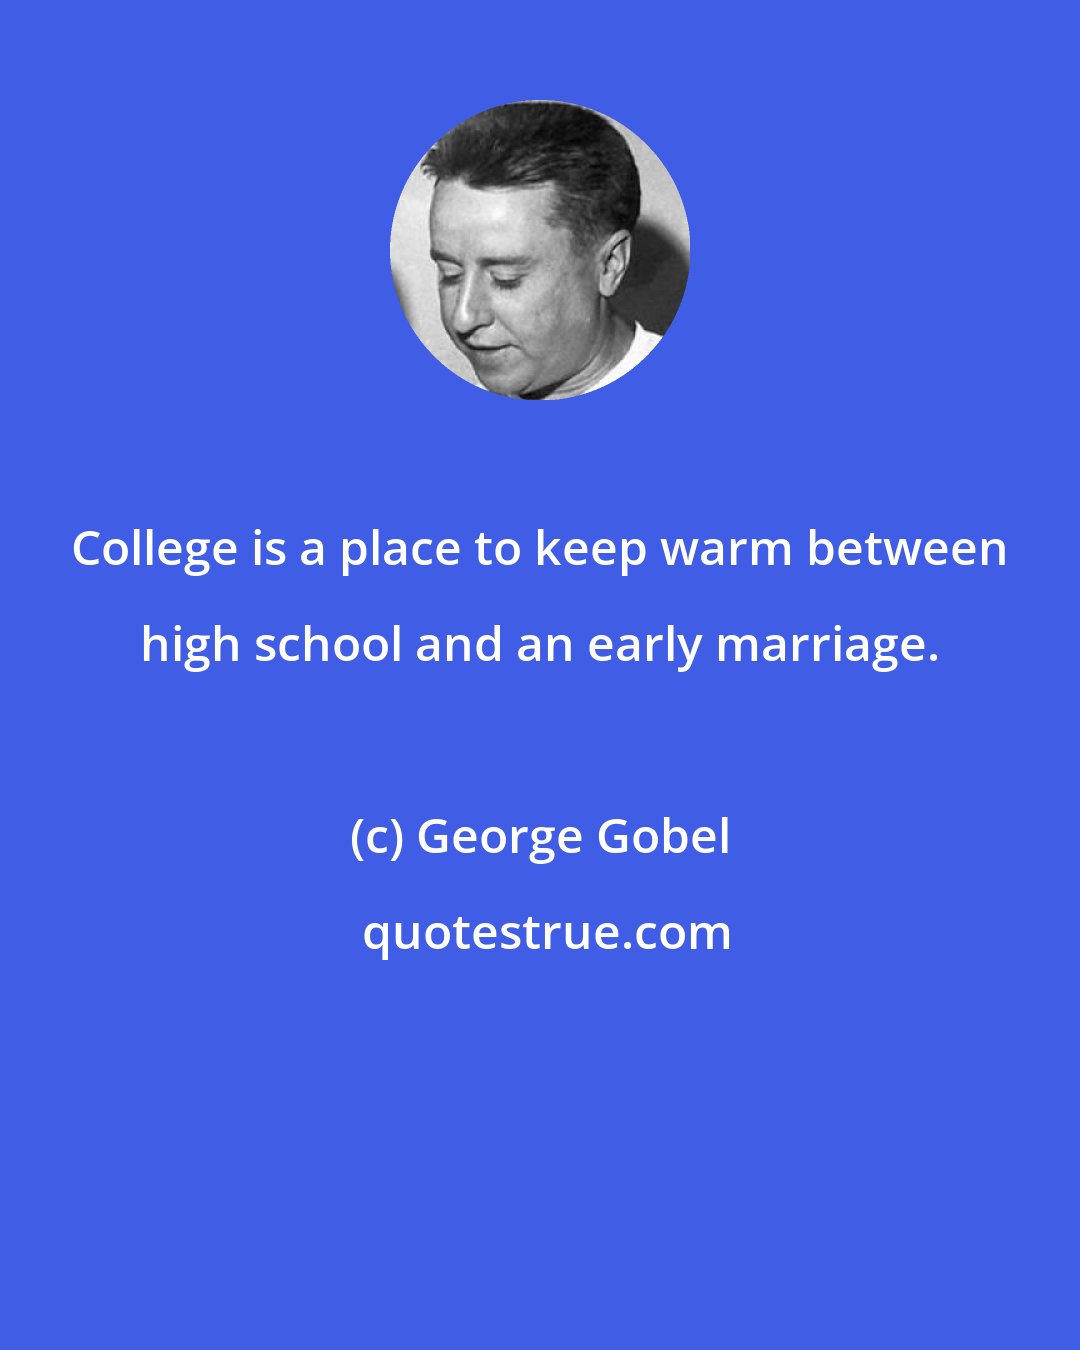 George Gobel: College is a place to keep warm between high school and an early marriage.